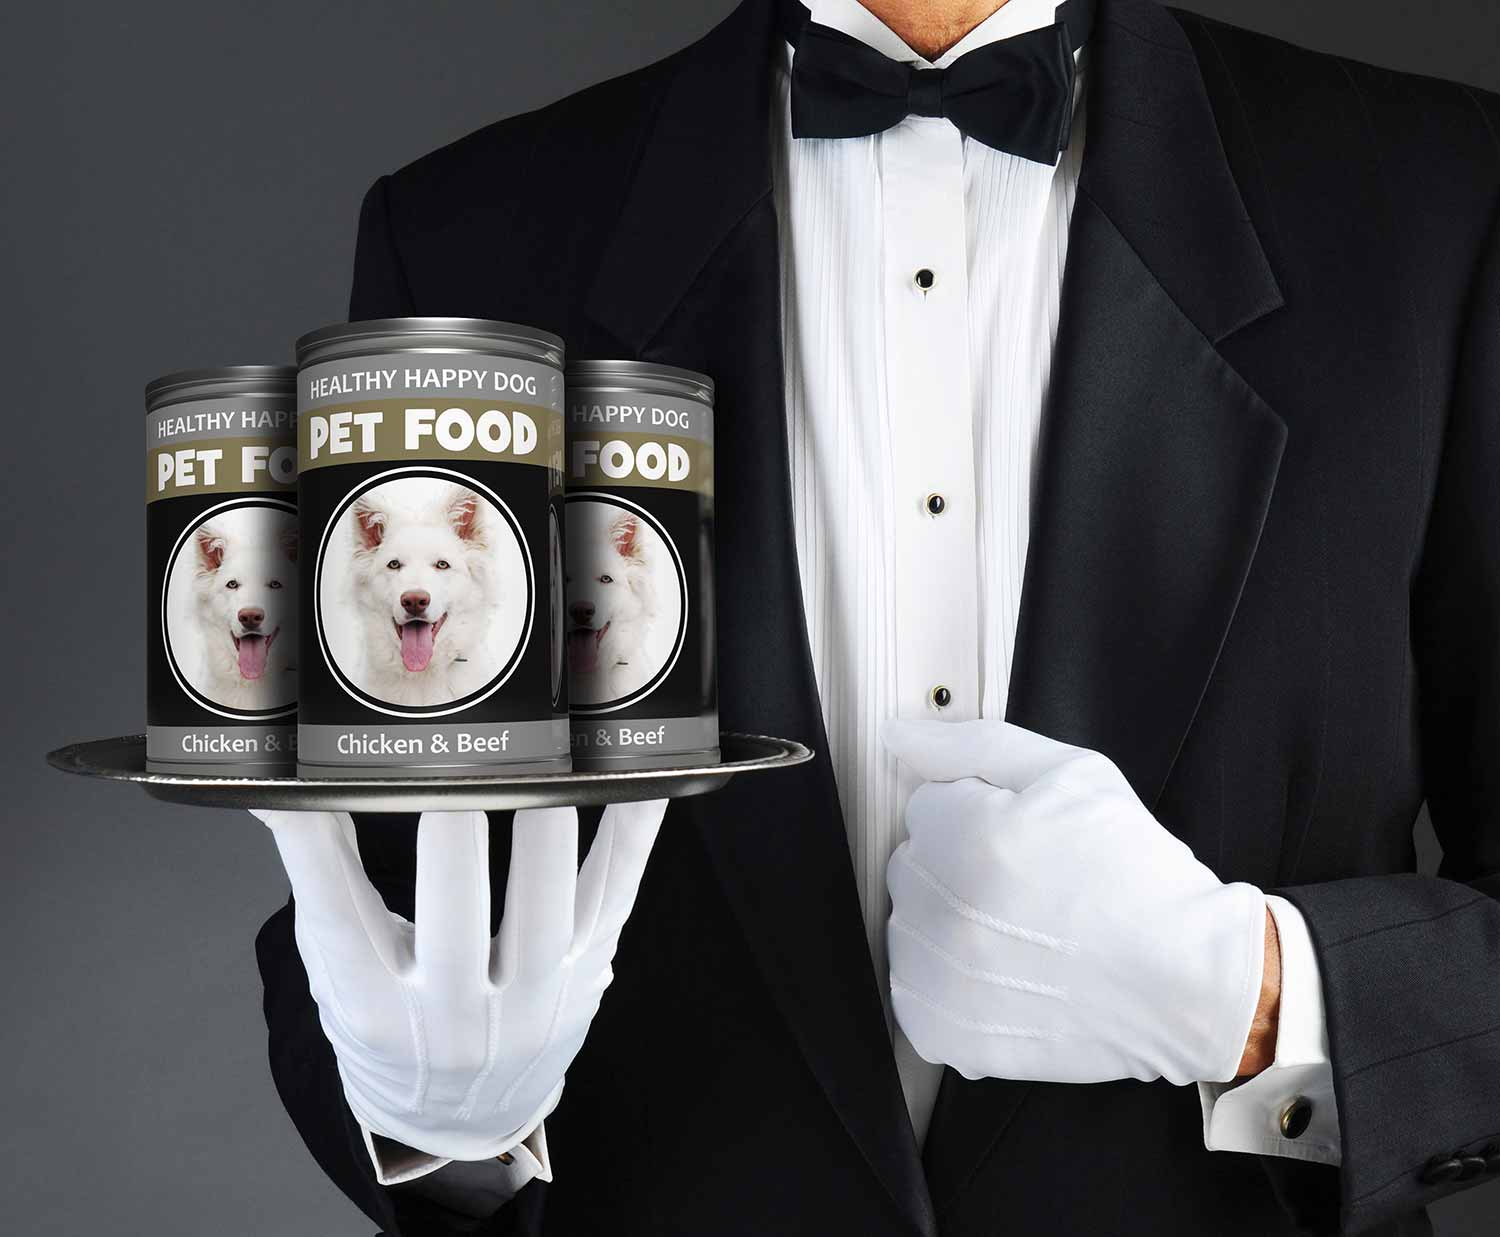 Waiter wearing white gloves and holding a silver tray with three cans of dog food on it